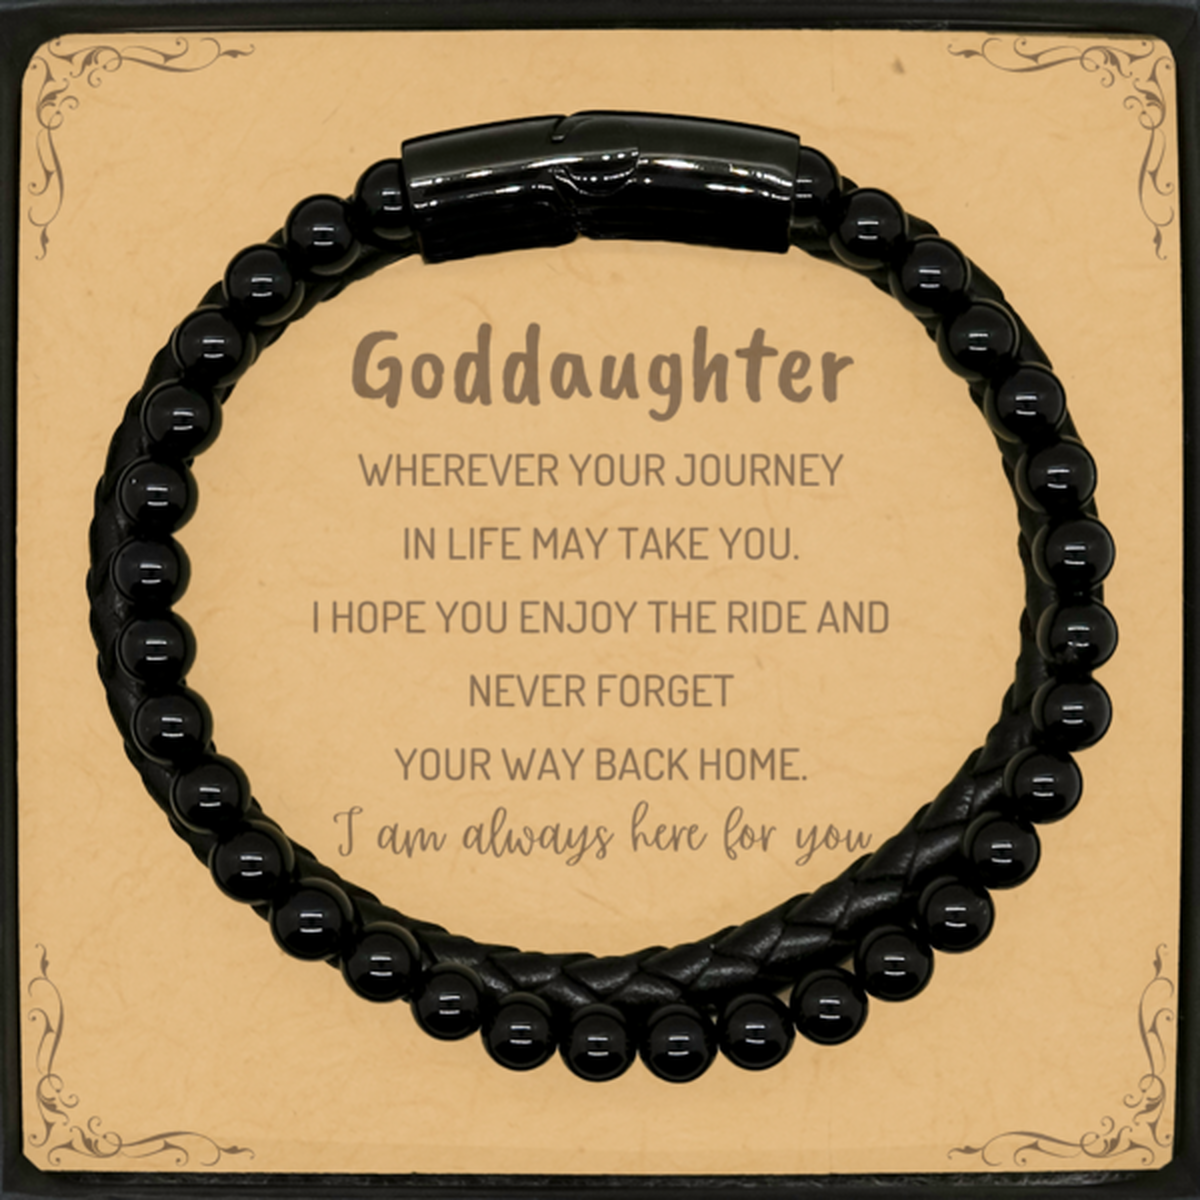 Goddaughter wherever your journey in life may take you, I am always here for you Goddaughter Stone Leather Bracelets, Awesome Christmas Gifts For Goddaughter Message Card, Goddaughter Birthday Gifts for Men Women Family Loved One